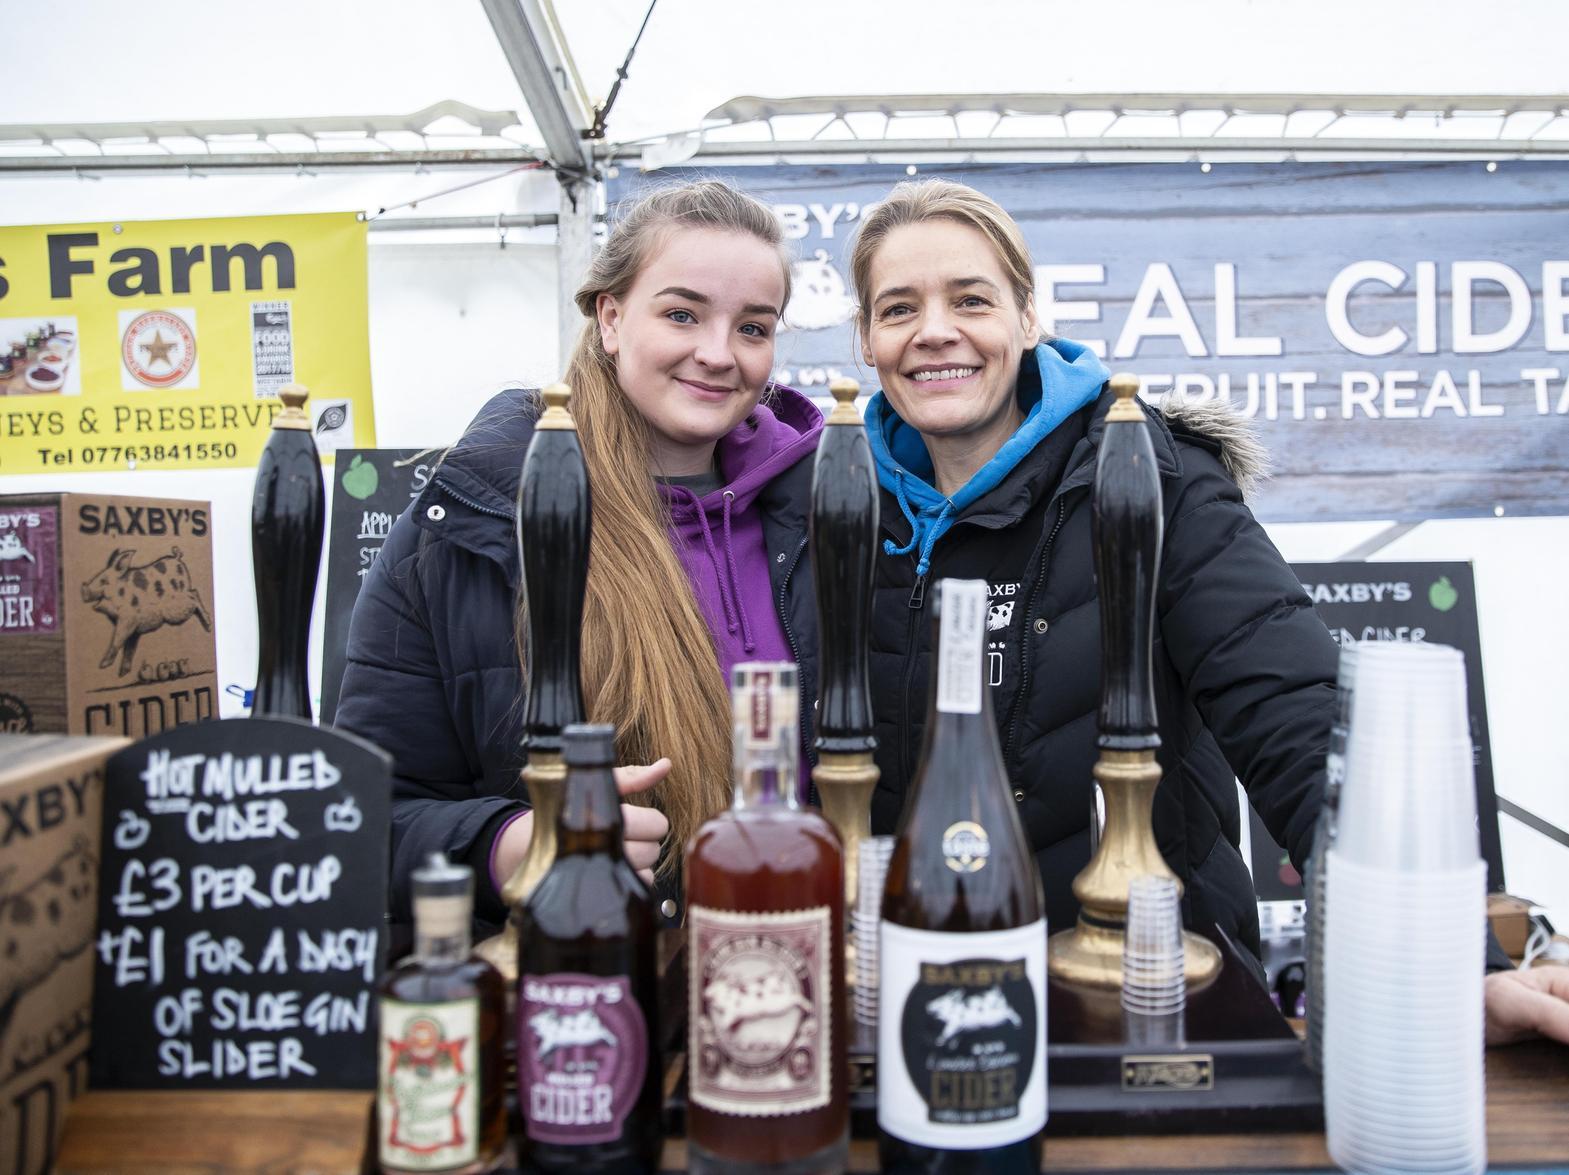 food fair favourites Saxby's Cider made an appearance to keep the sloe gin and cider flowing...